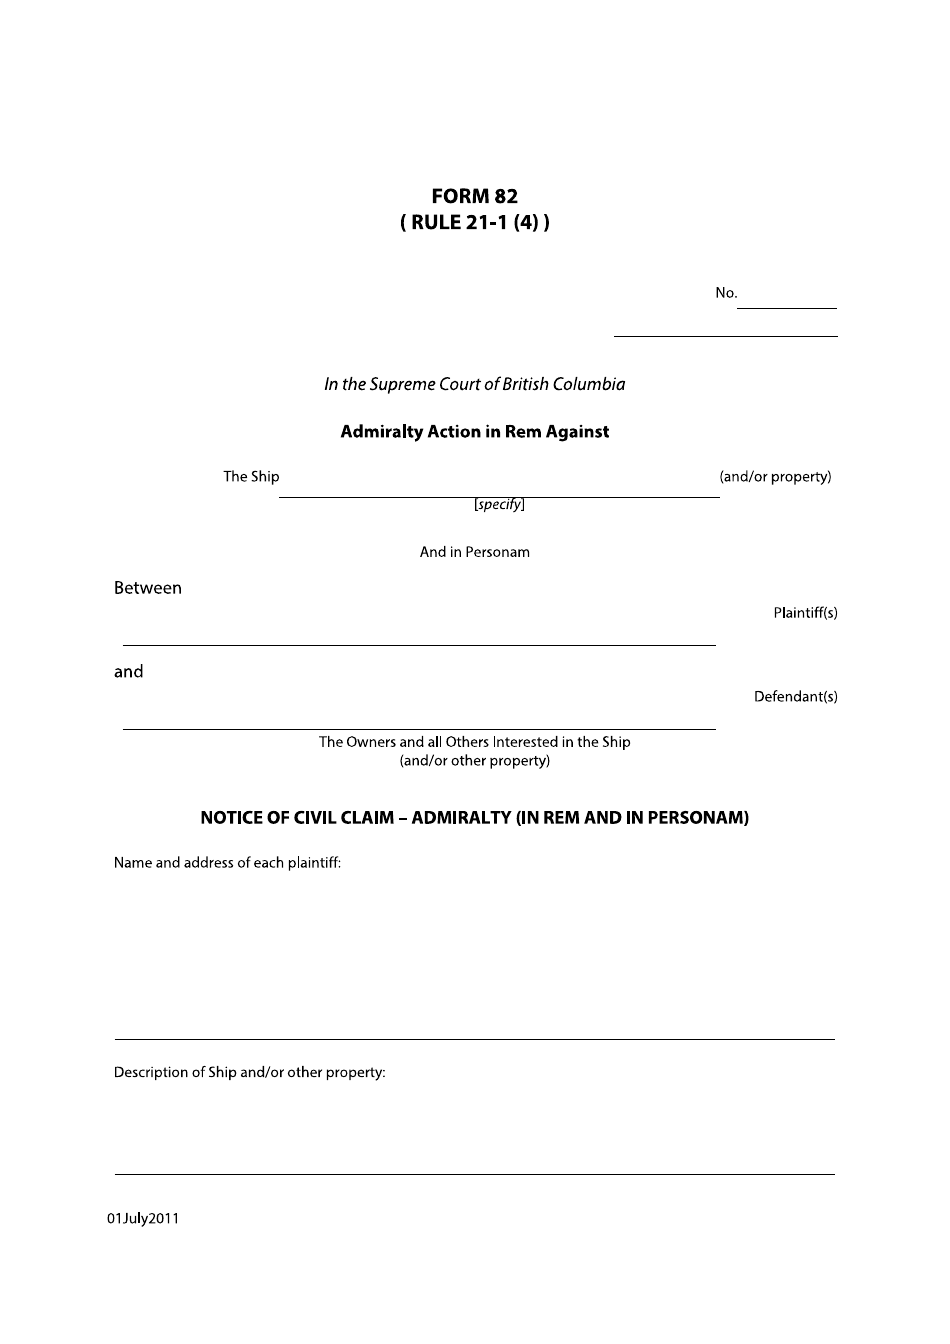 Form 82 Notice of Civil Claim - Admiralty (In Rem and in Personam) - British Columbia, Canada, Page 1